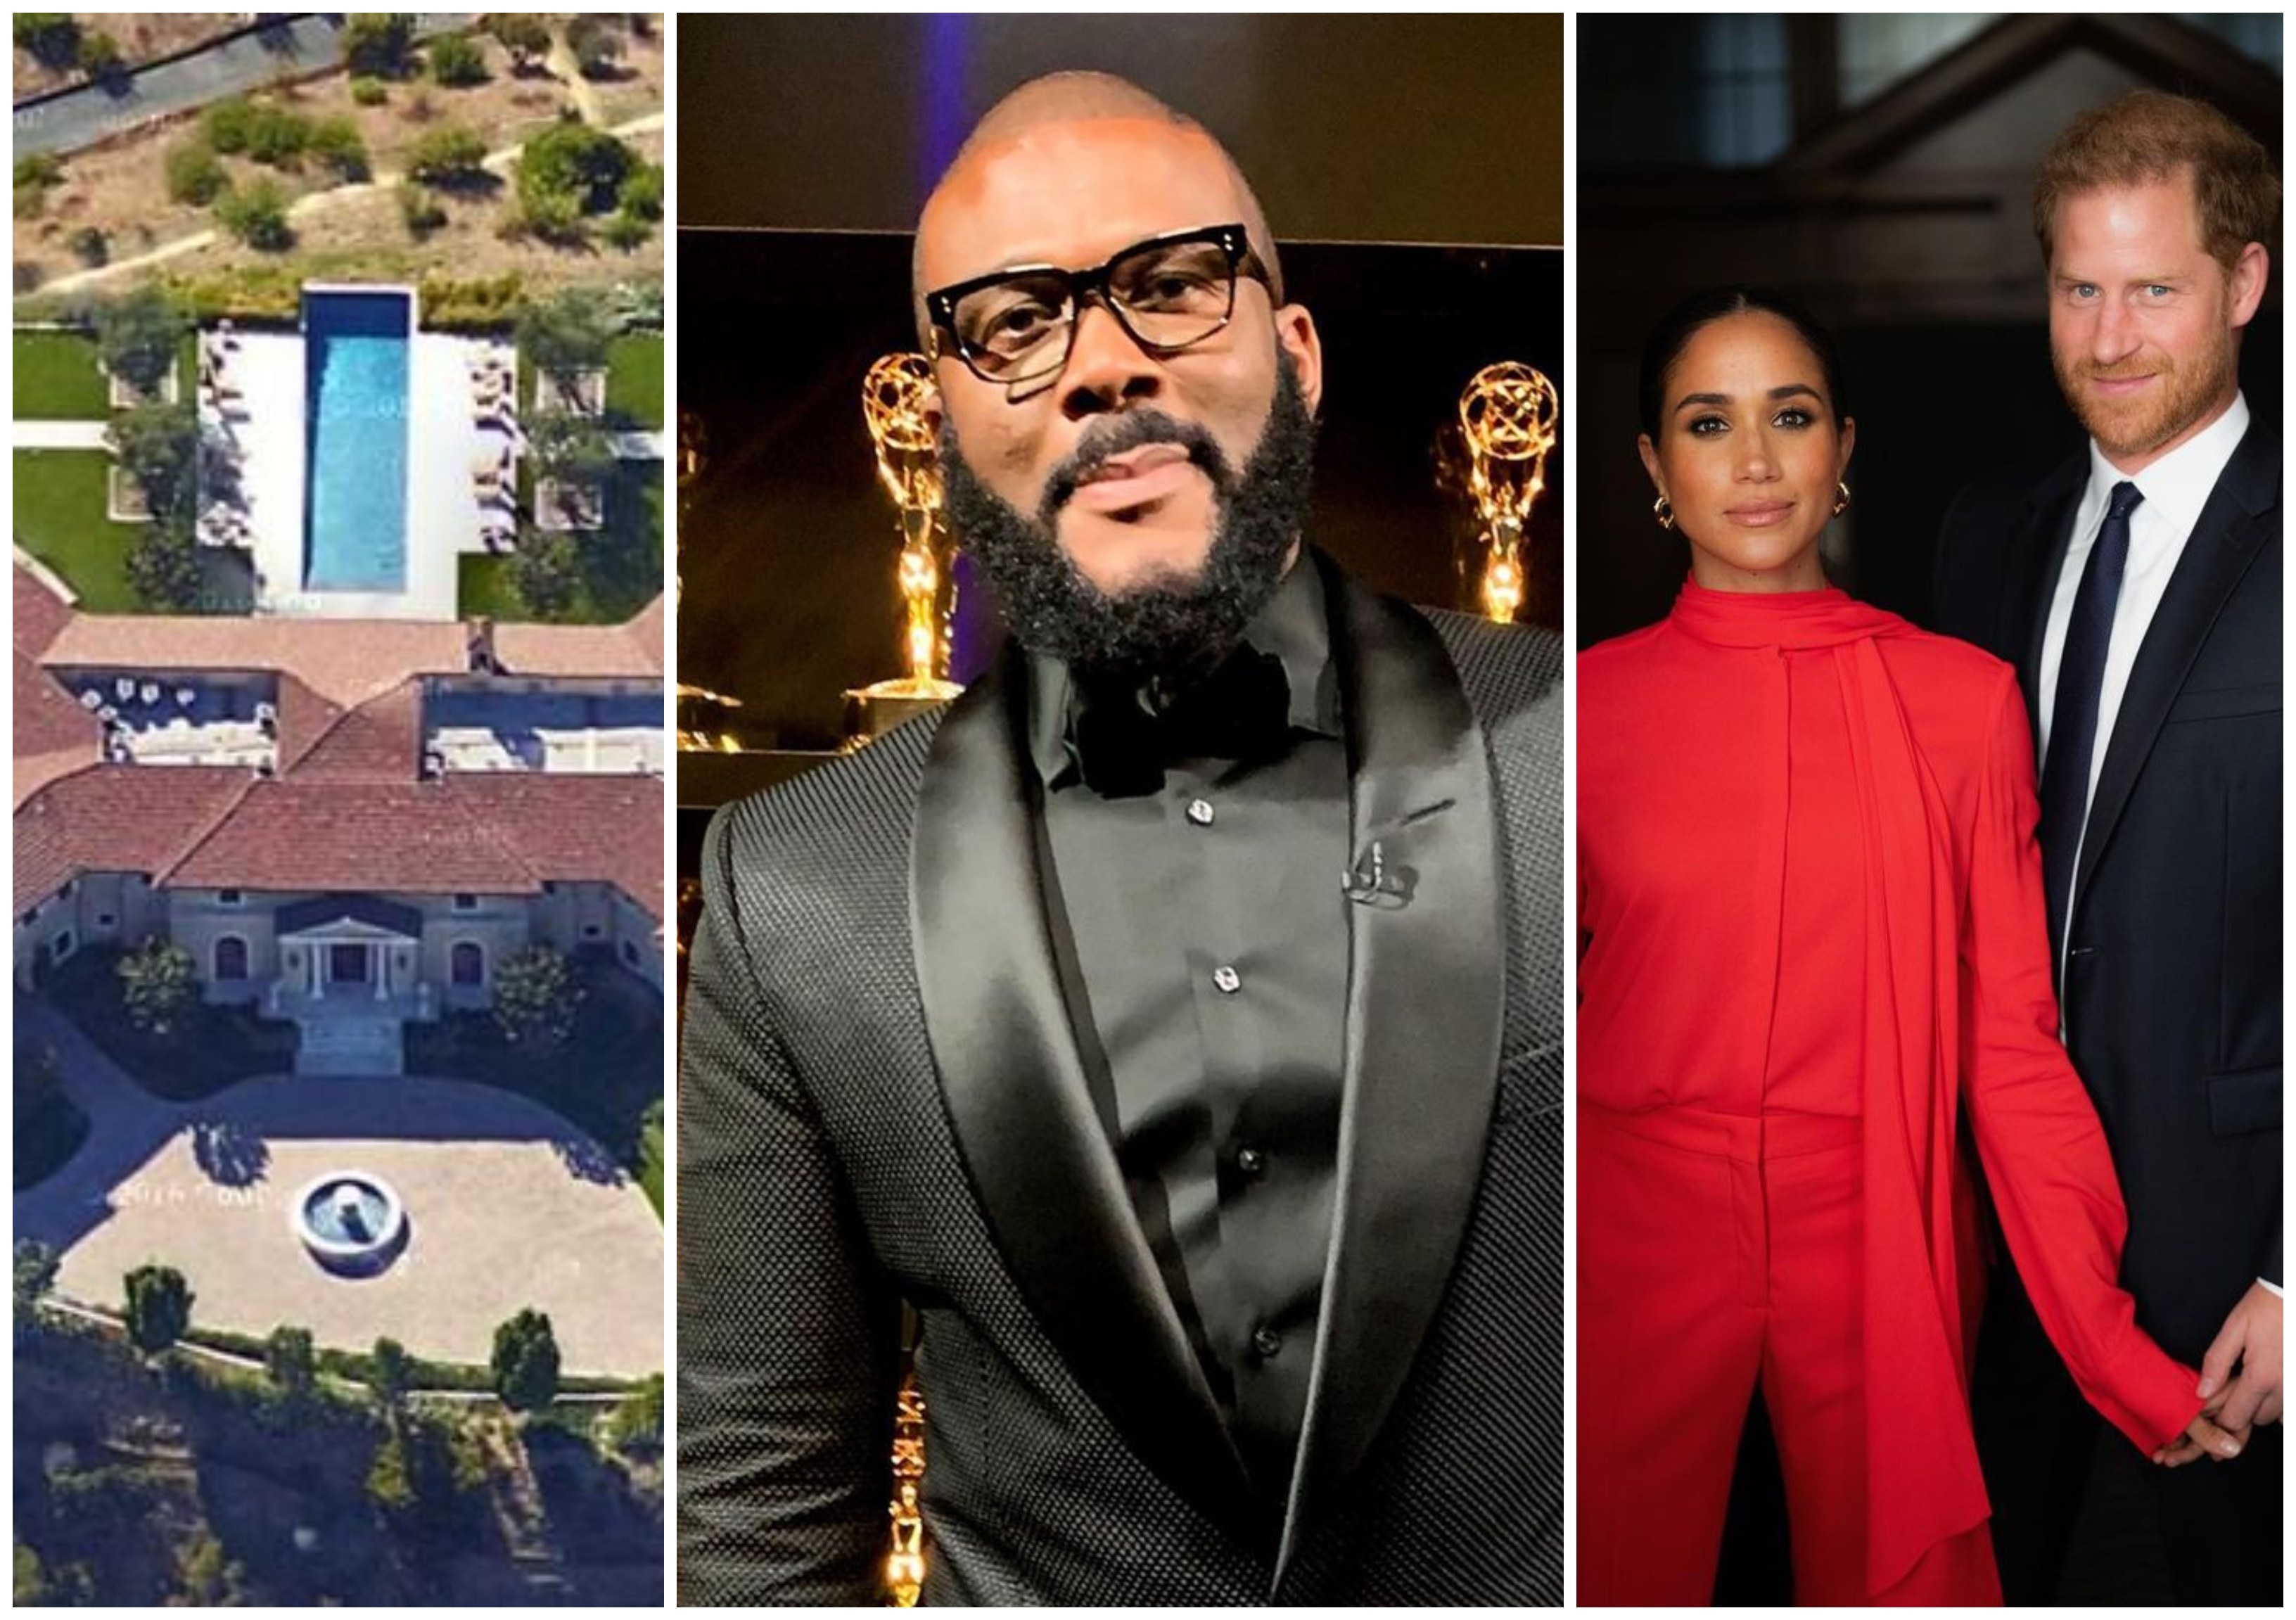 Tyler Perry is a Hollywood writer, actor and producer ... and godfather to Prince Harry and Meghan Markle’s daughter, Lilibet Diana. Photos: @tylerperry/Instagram, Handout, Google Earth